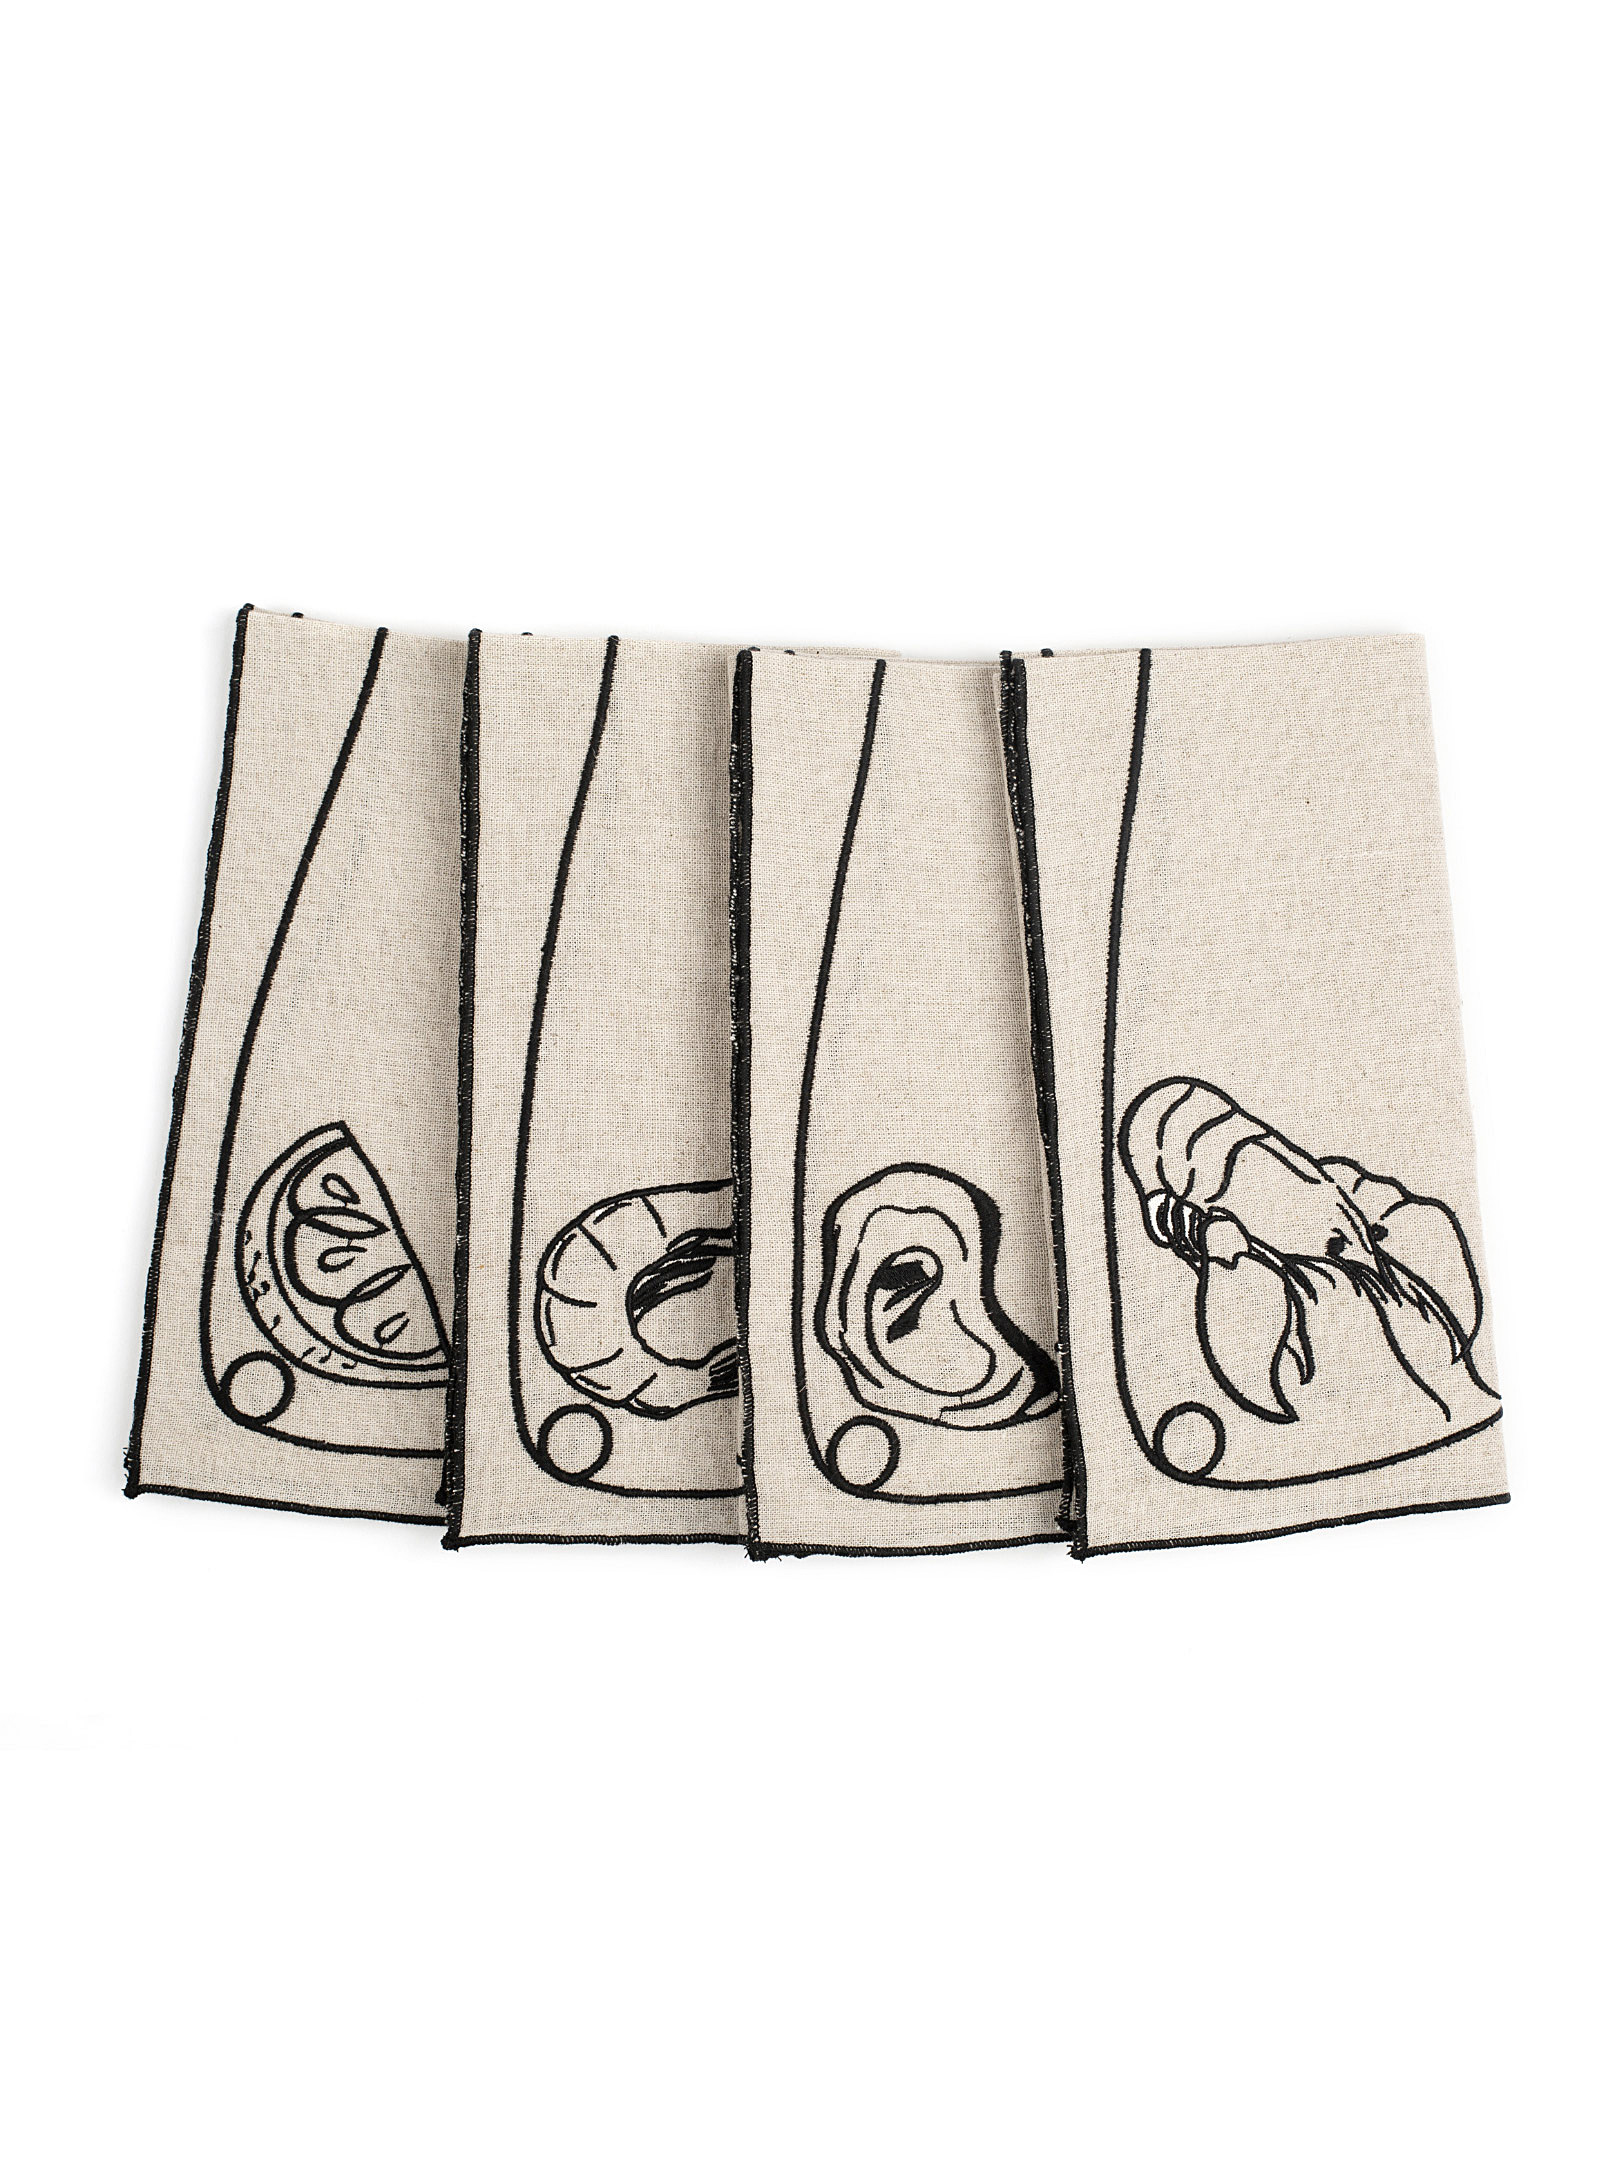 Misette Seafood Embroidery Linen Napkins Set Of 4 In Cream Beige